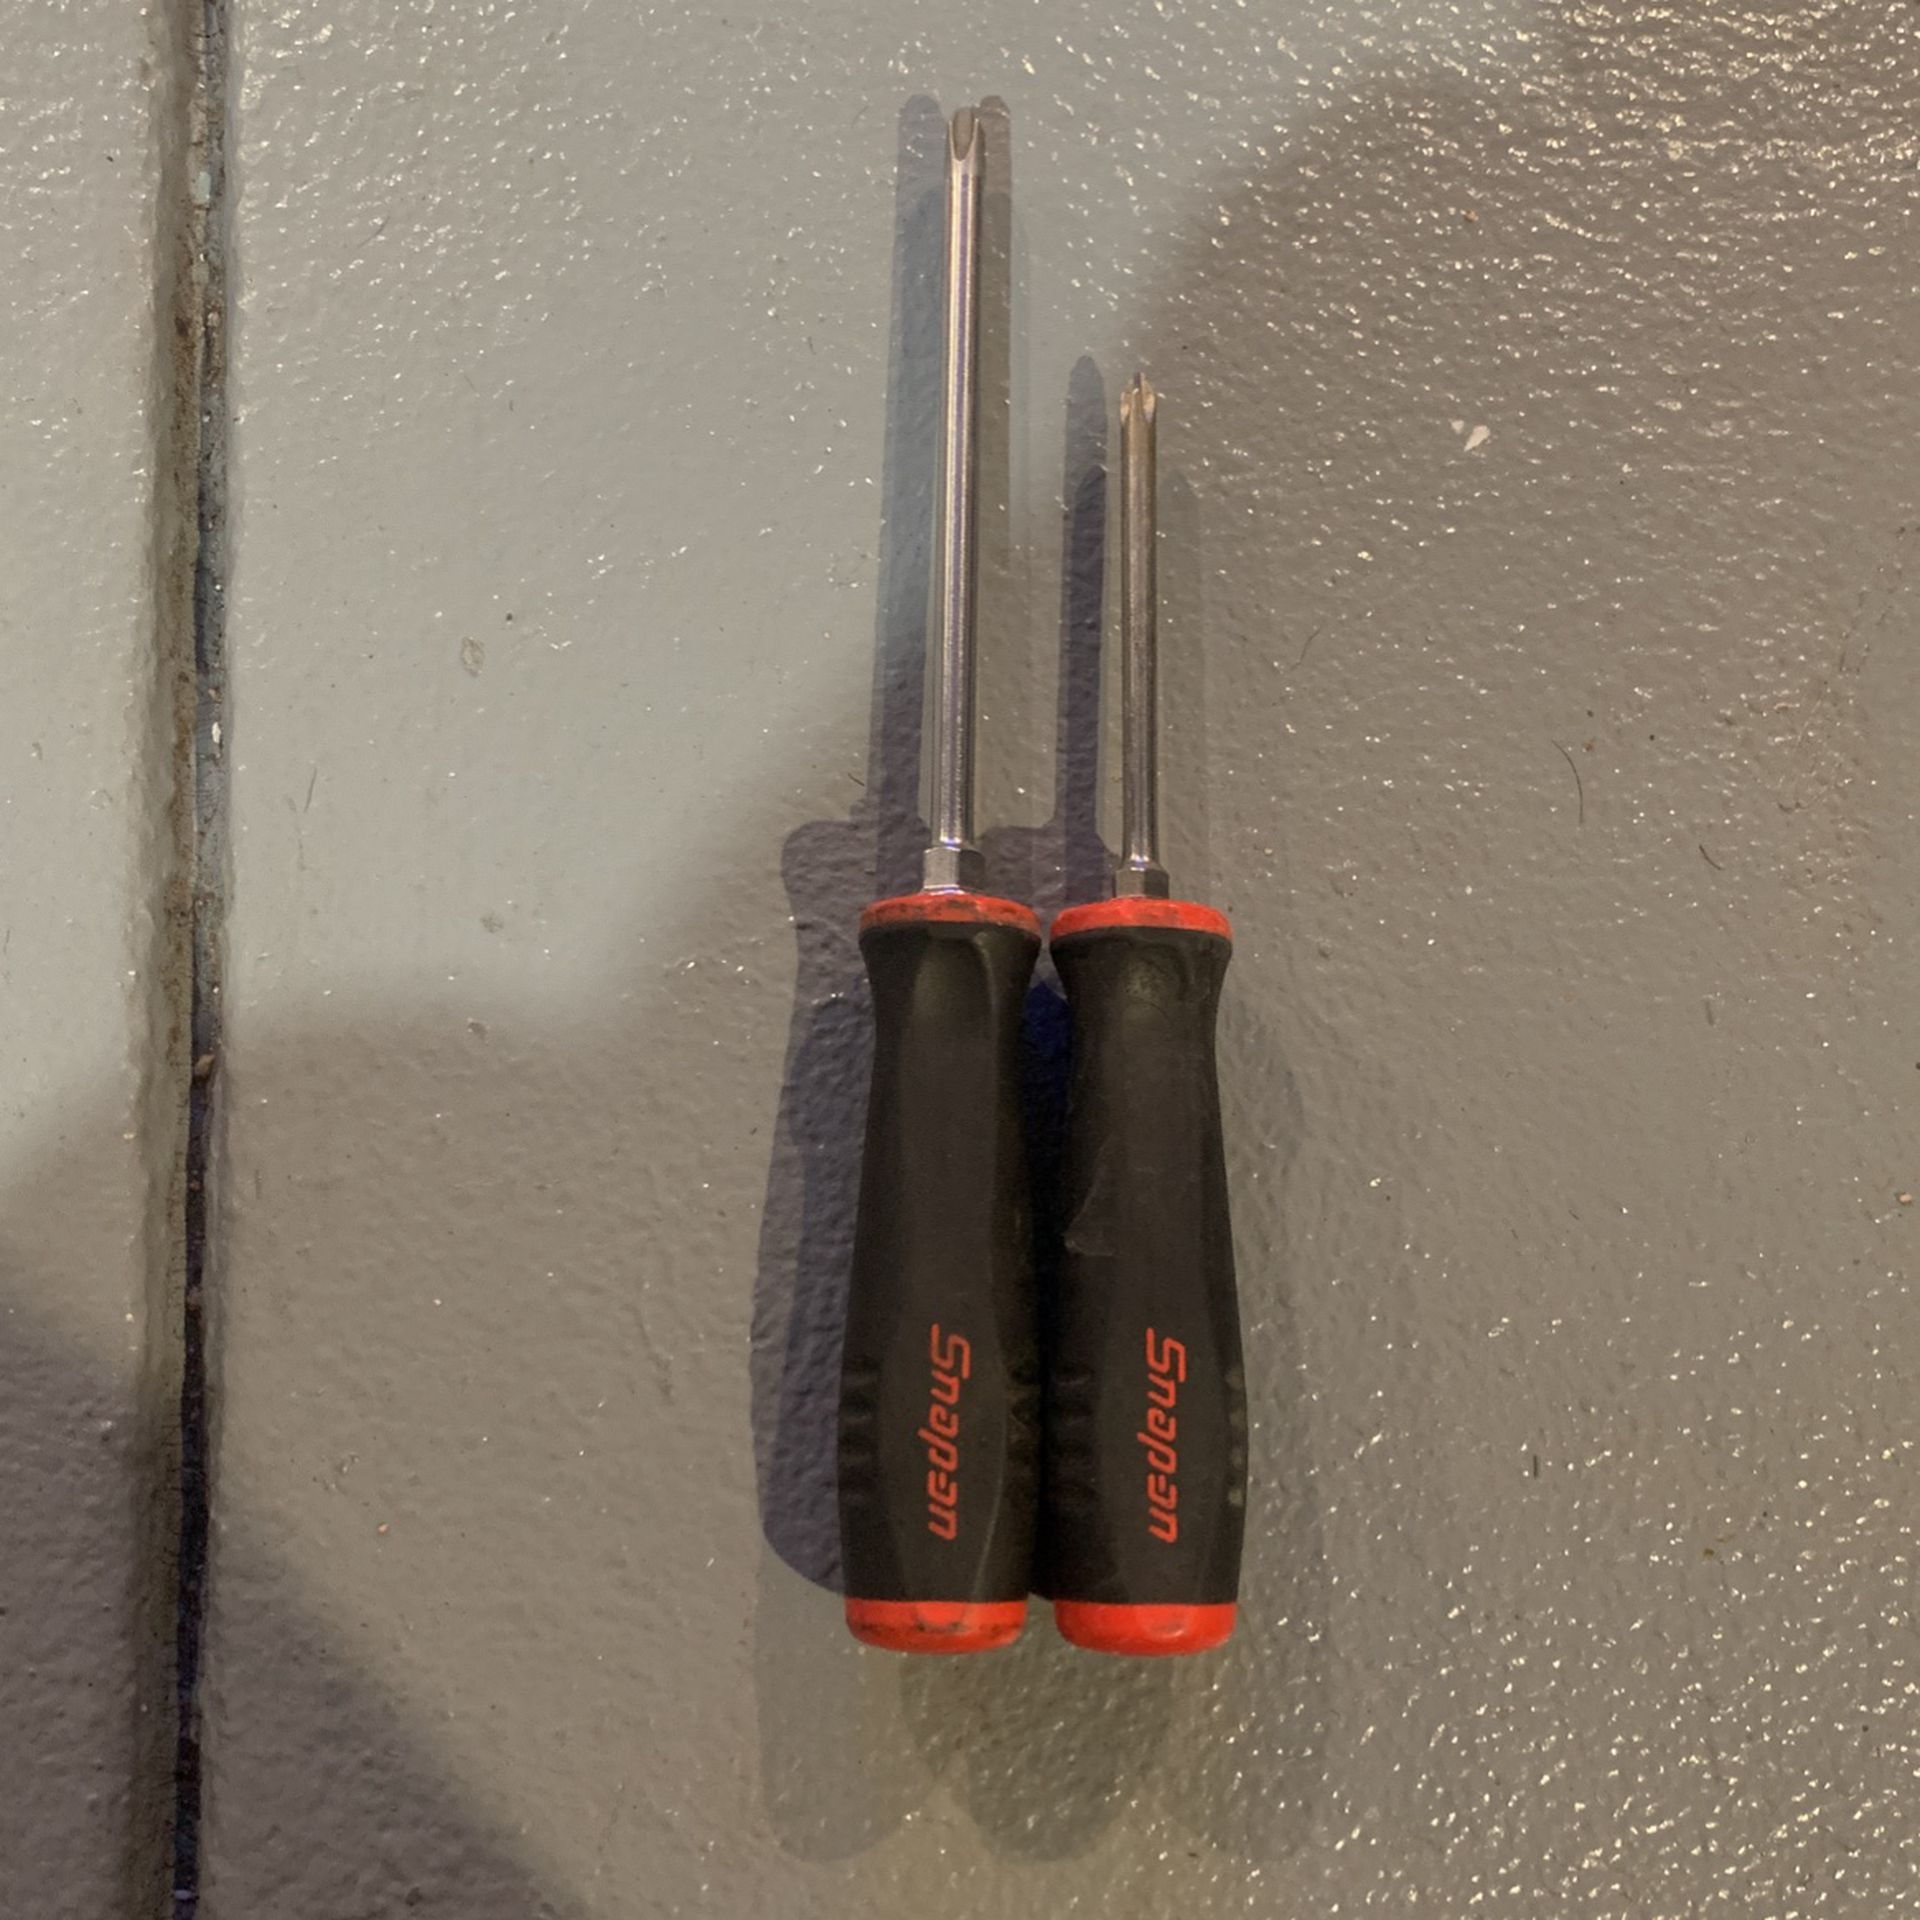 Snap On Screwdrivers 